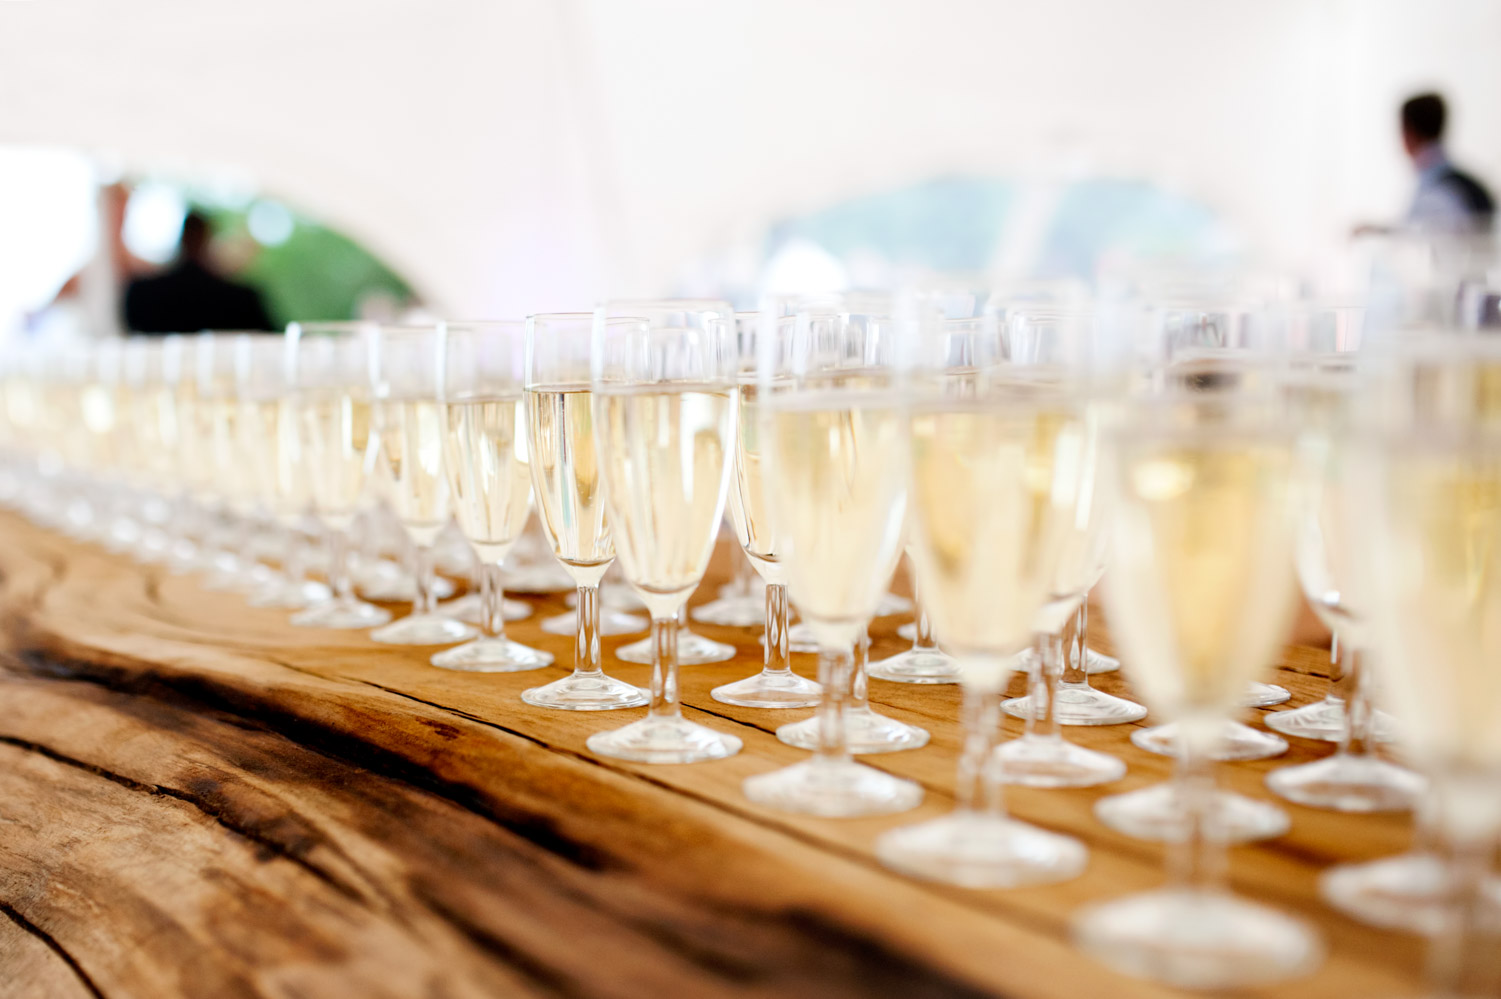 Champagne flutes laid out on wooden table